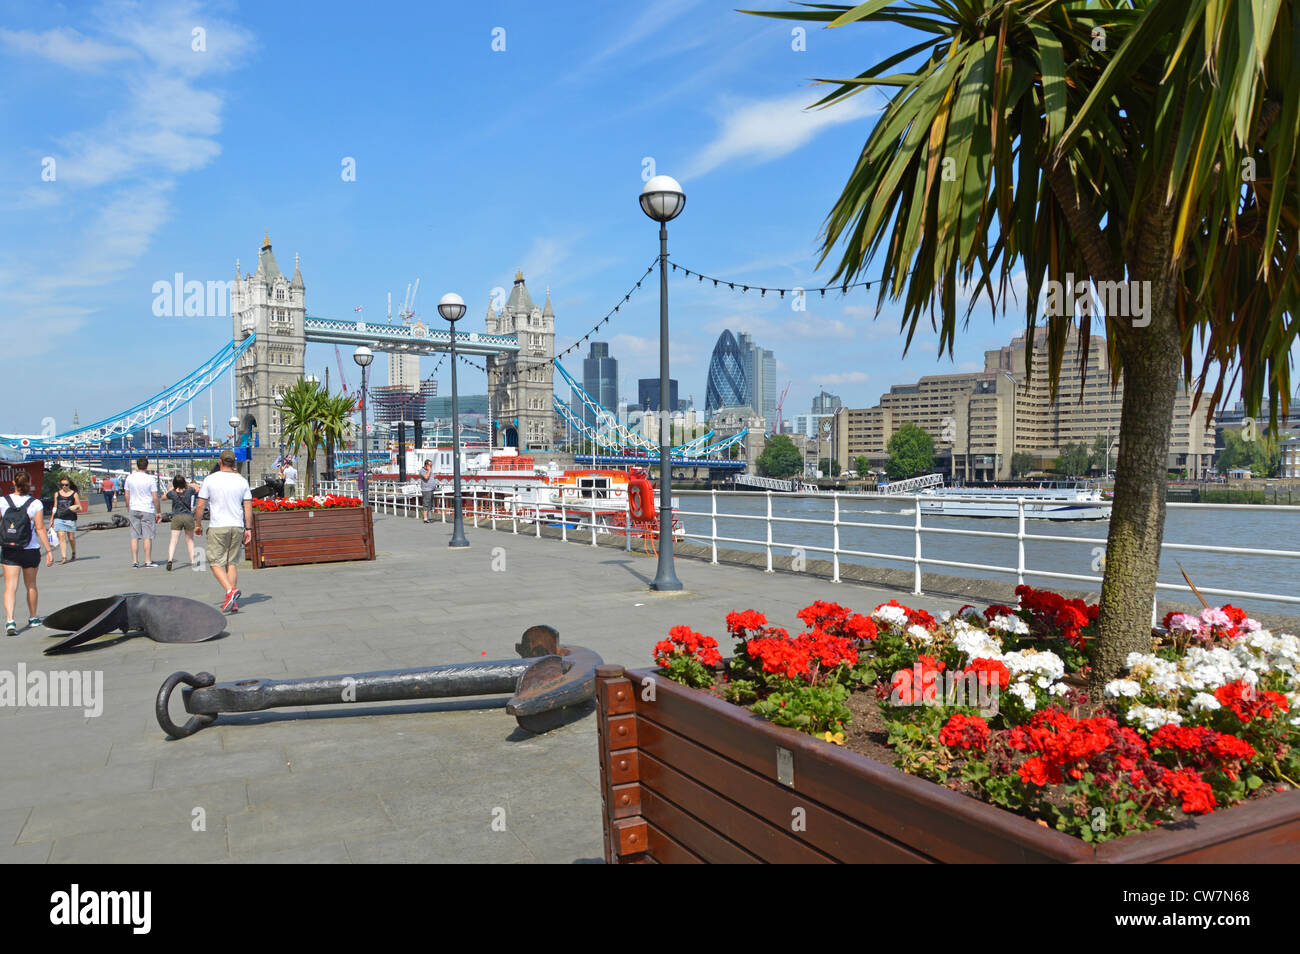 Thames path Butlers Wharf on River Thames views of Tower Bridge & London skyline waterside flower blooms in planter boxes & cordyline trees London UK Stock Photo